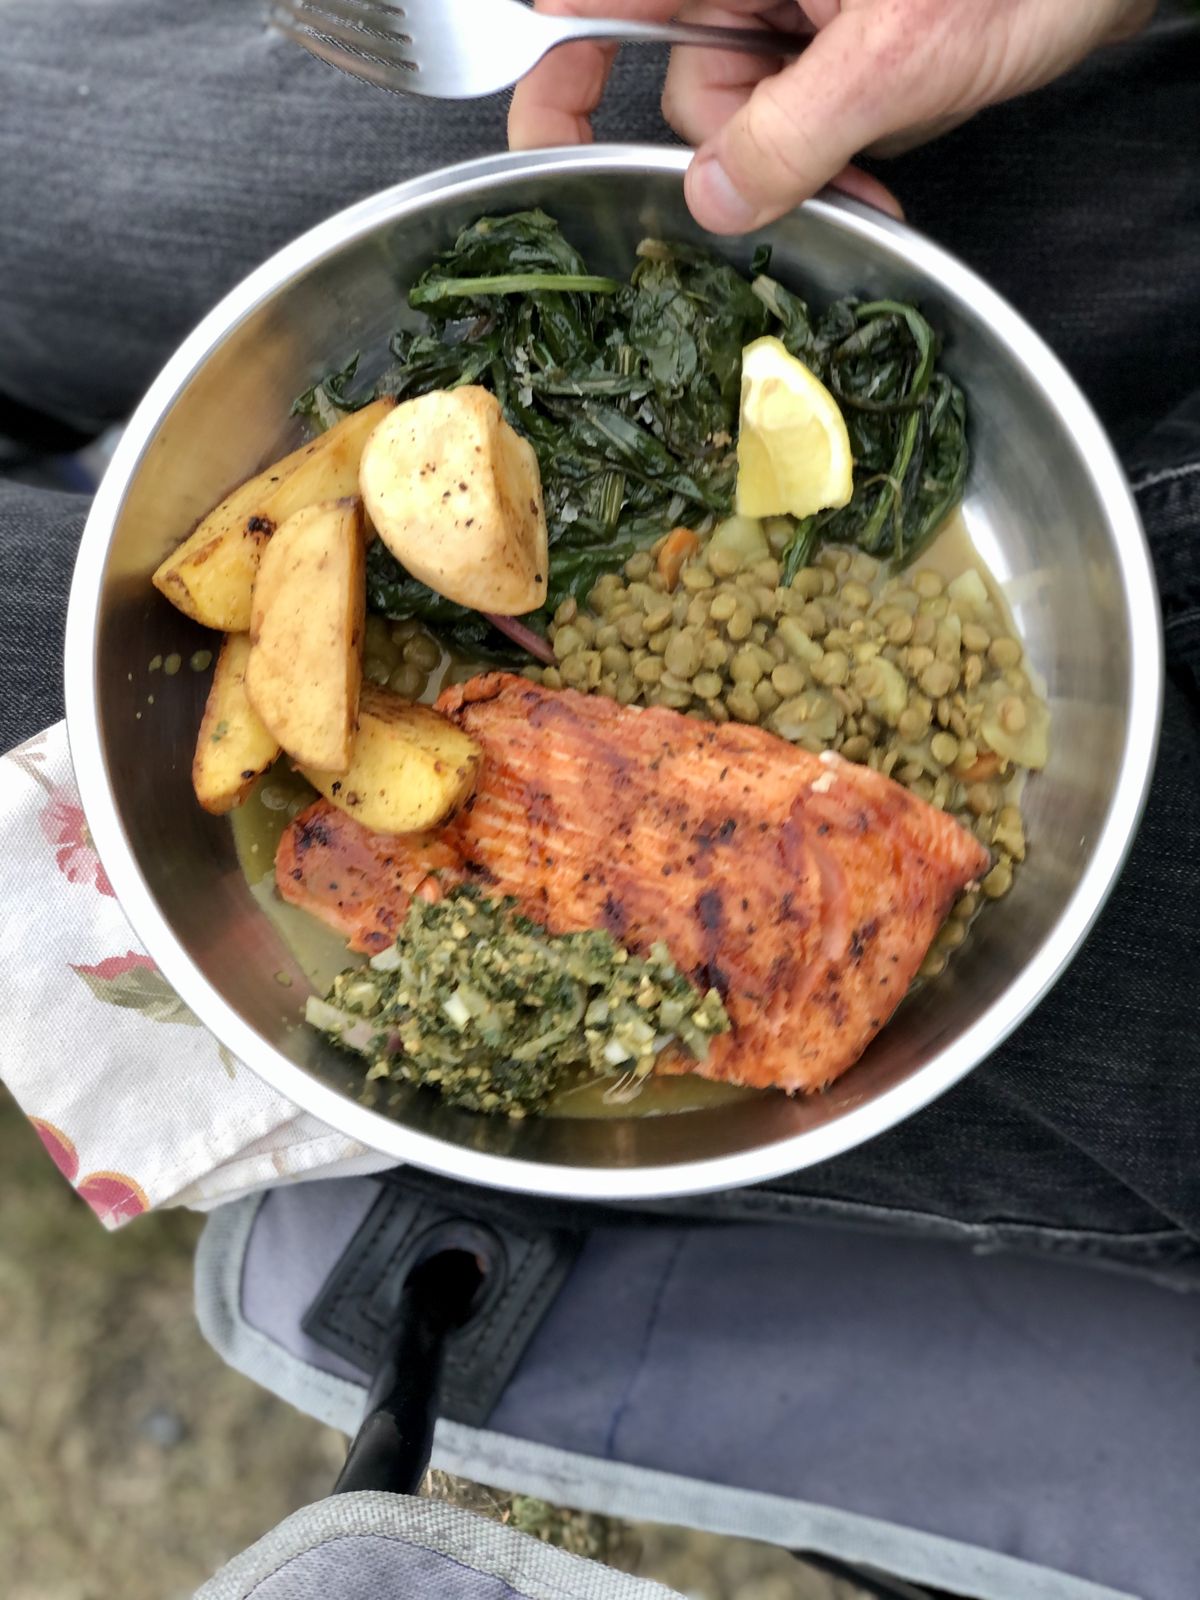 Grilled salmon on curried lentils is a hit by the campfire. (Leslie Kelly)